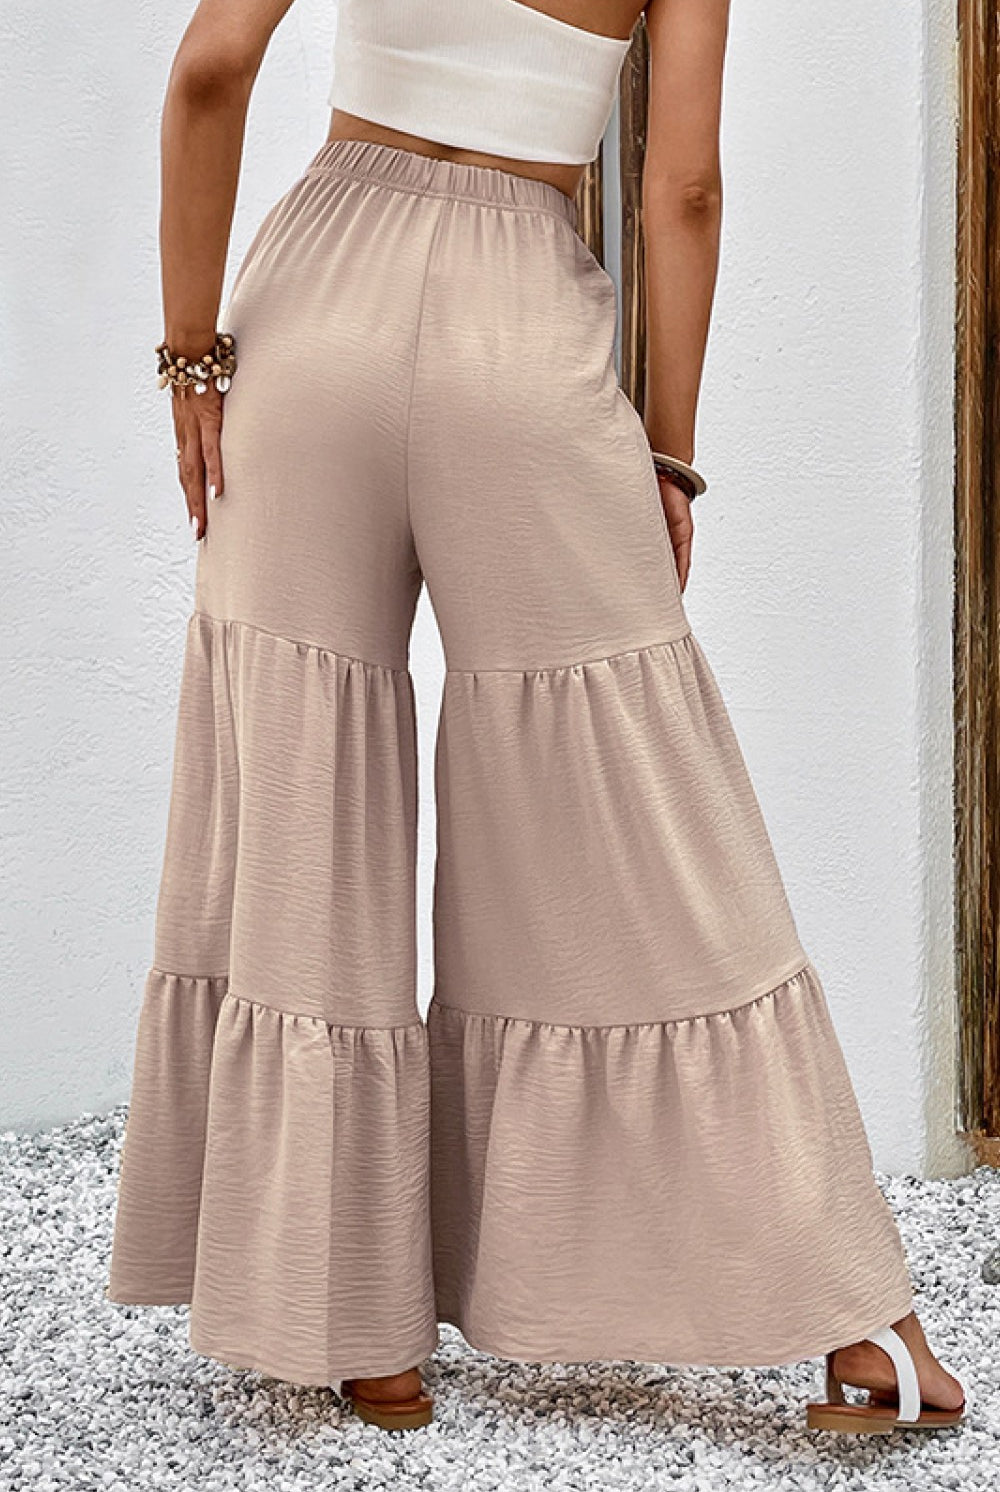 Gray Drawstring Waist Tiered Flare Culottes Clothing